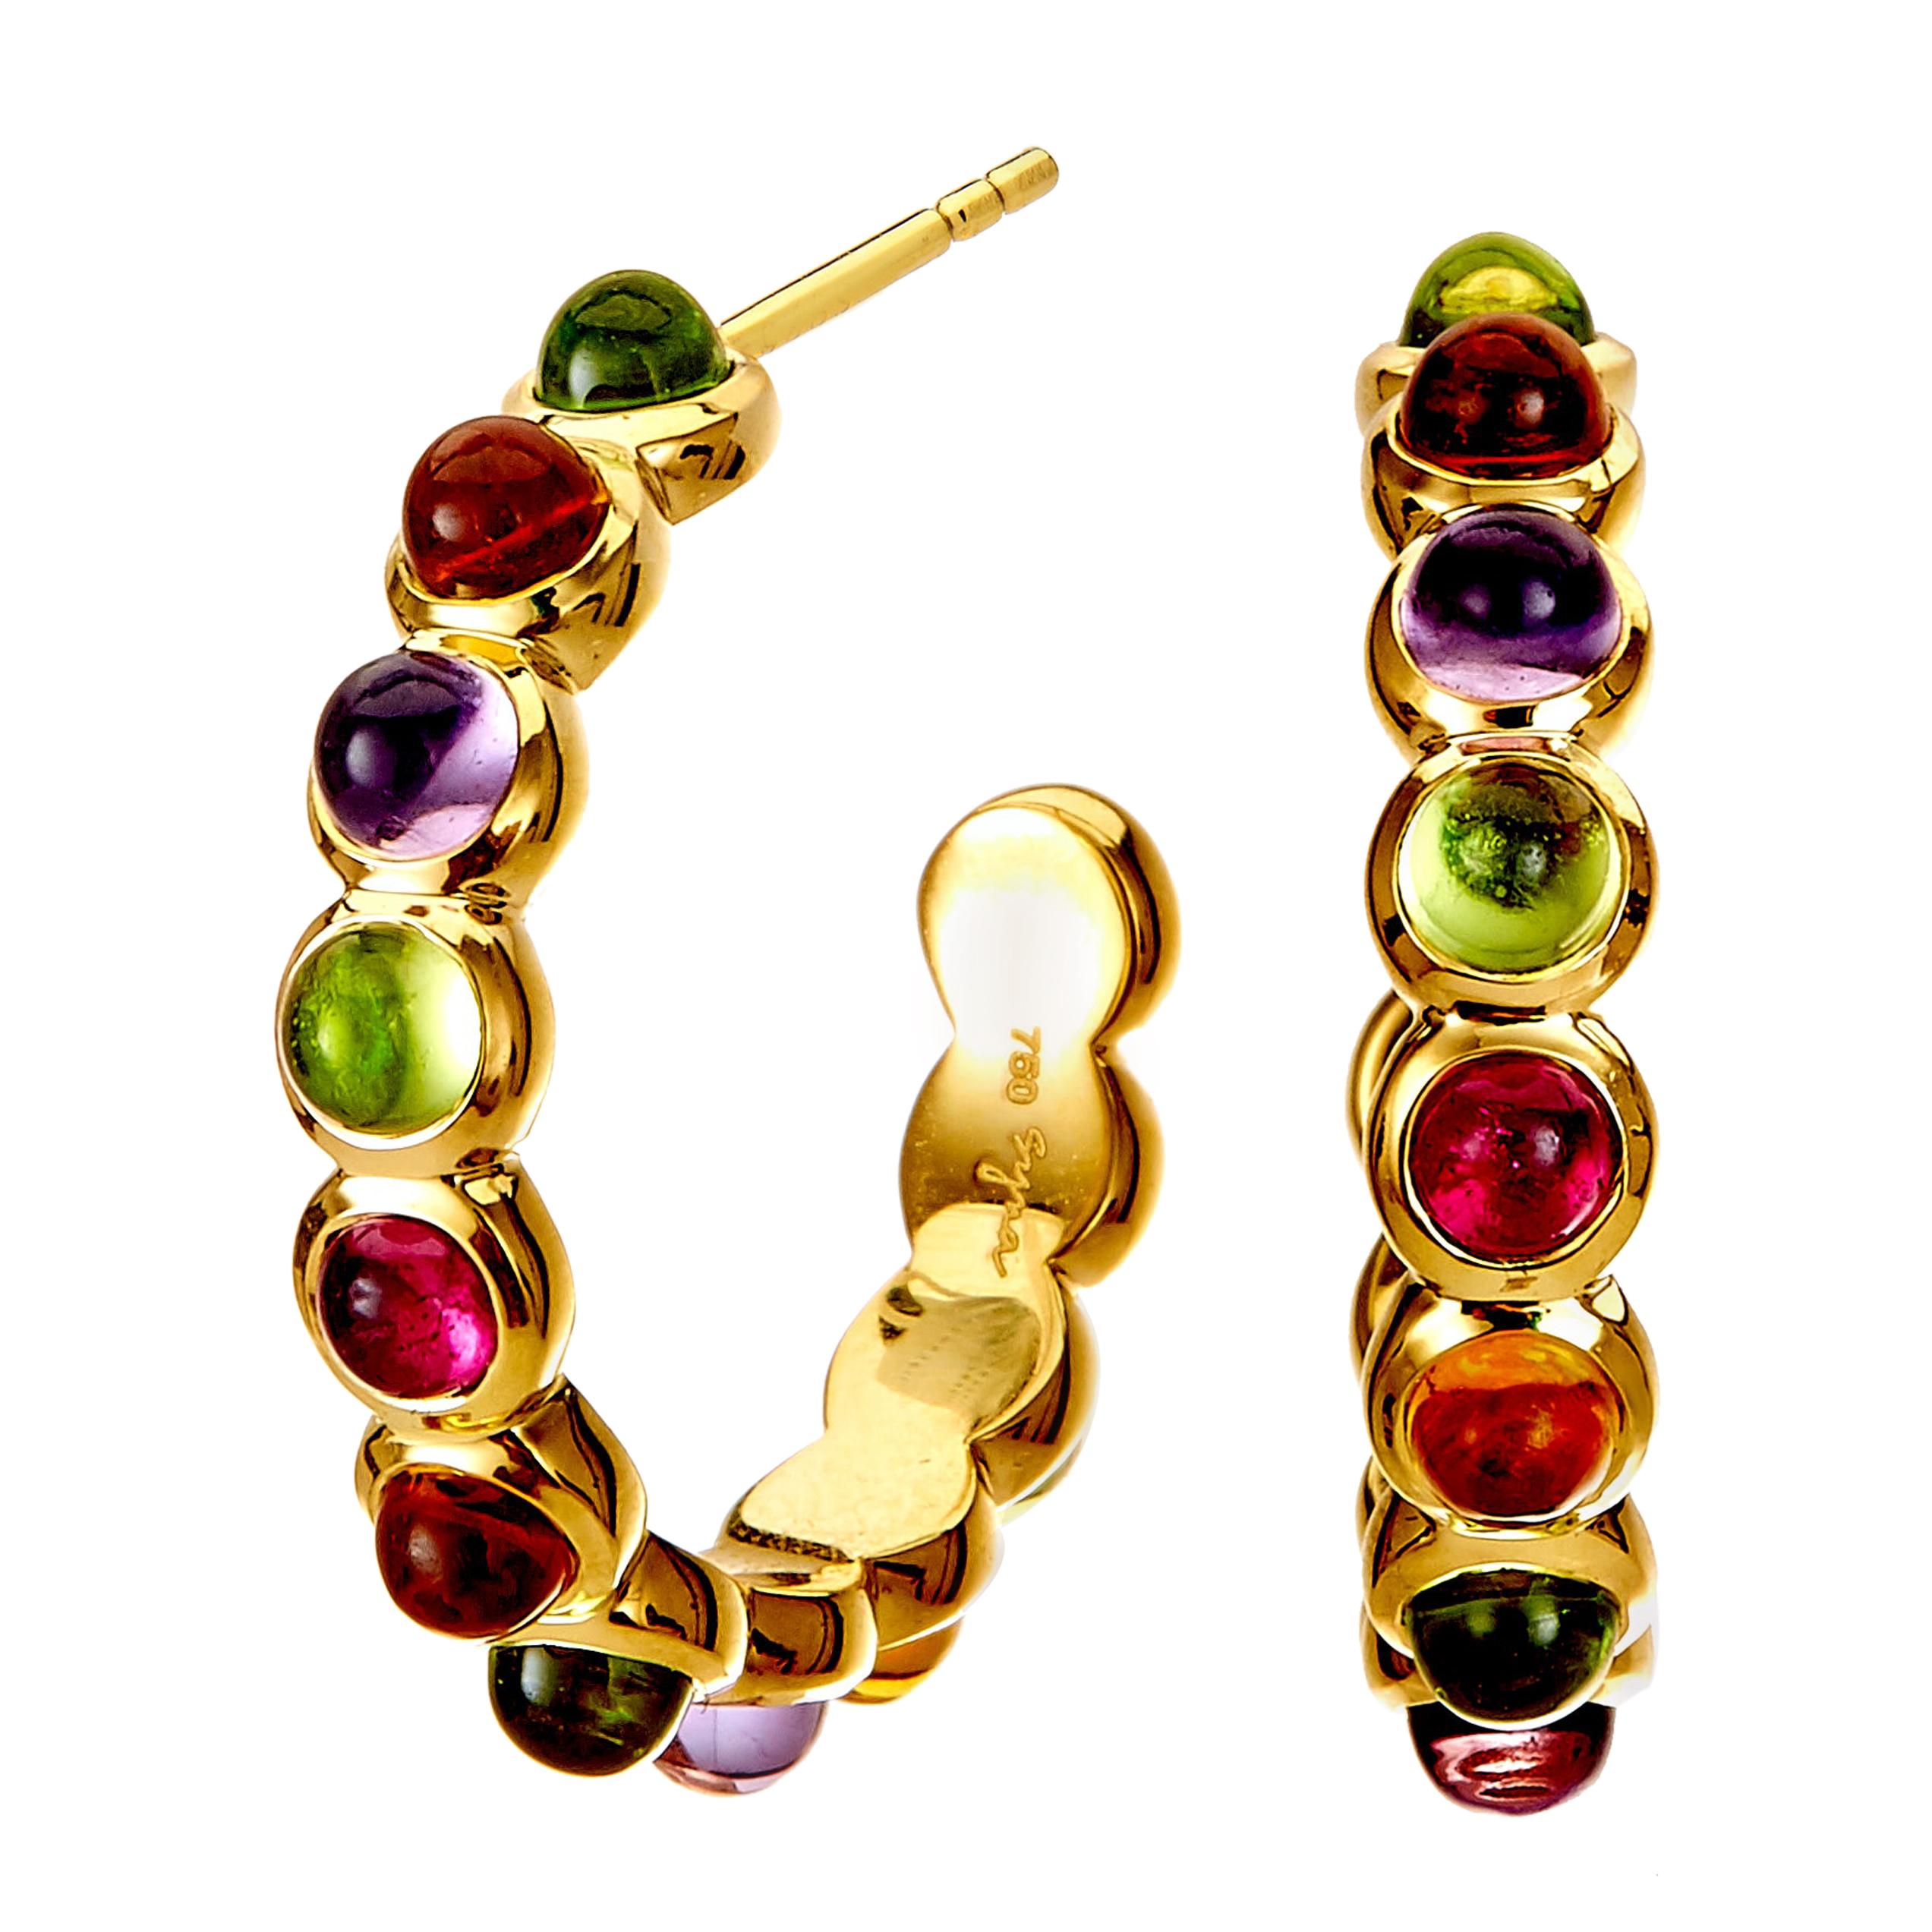 Syna Yellow Gold Hoop Earrings with Rubellite, Peridot, Amethyst and Citrine